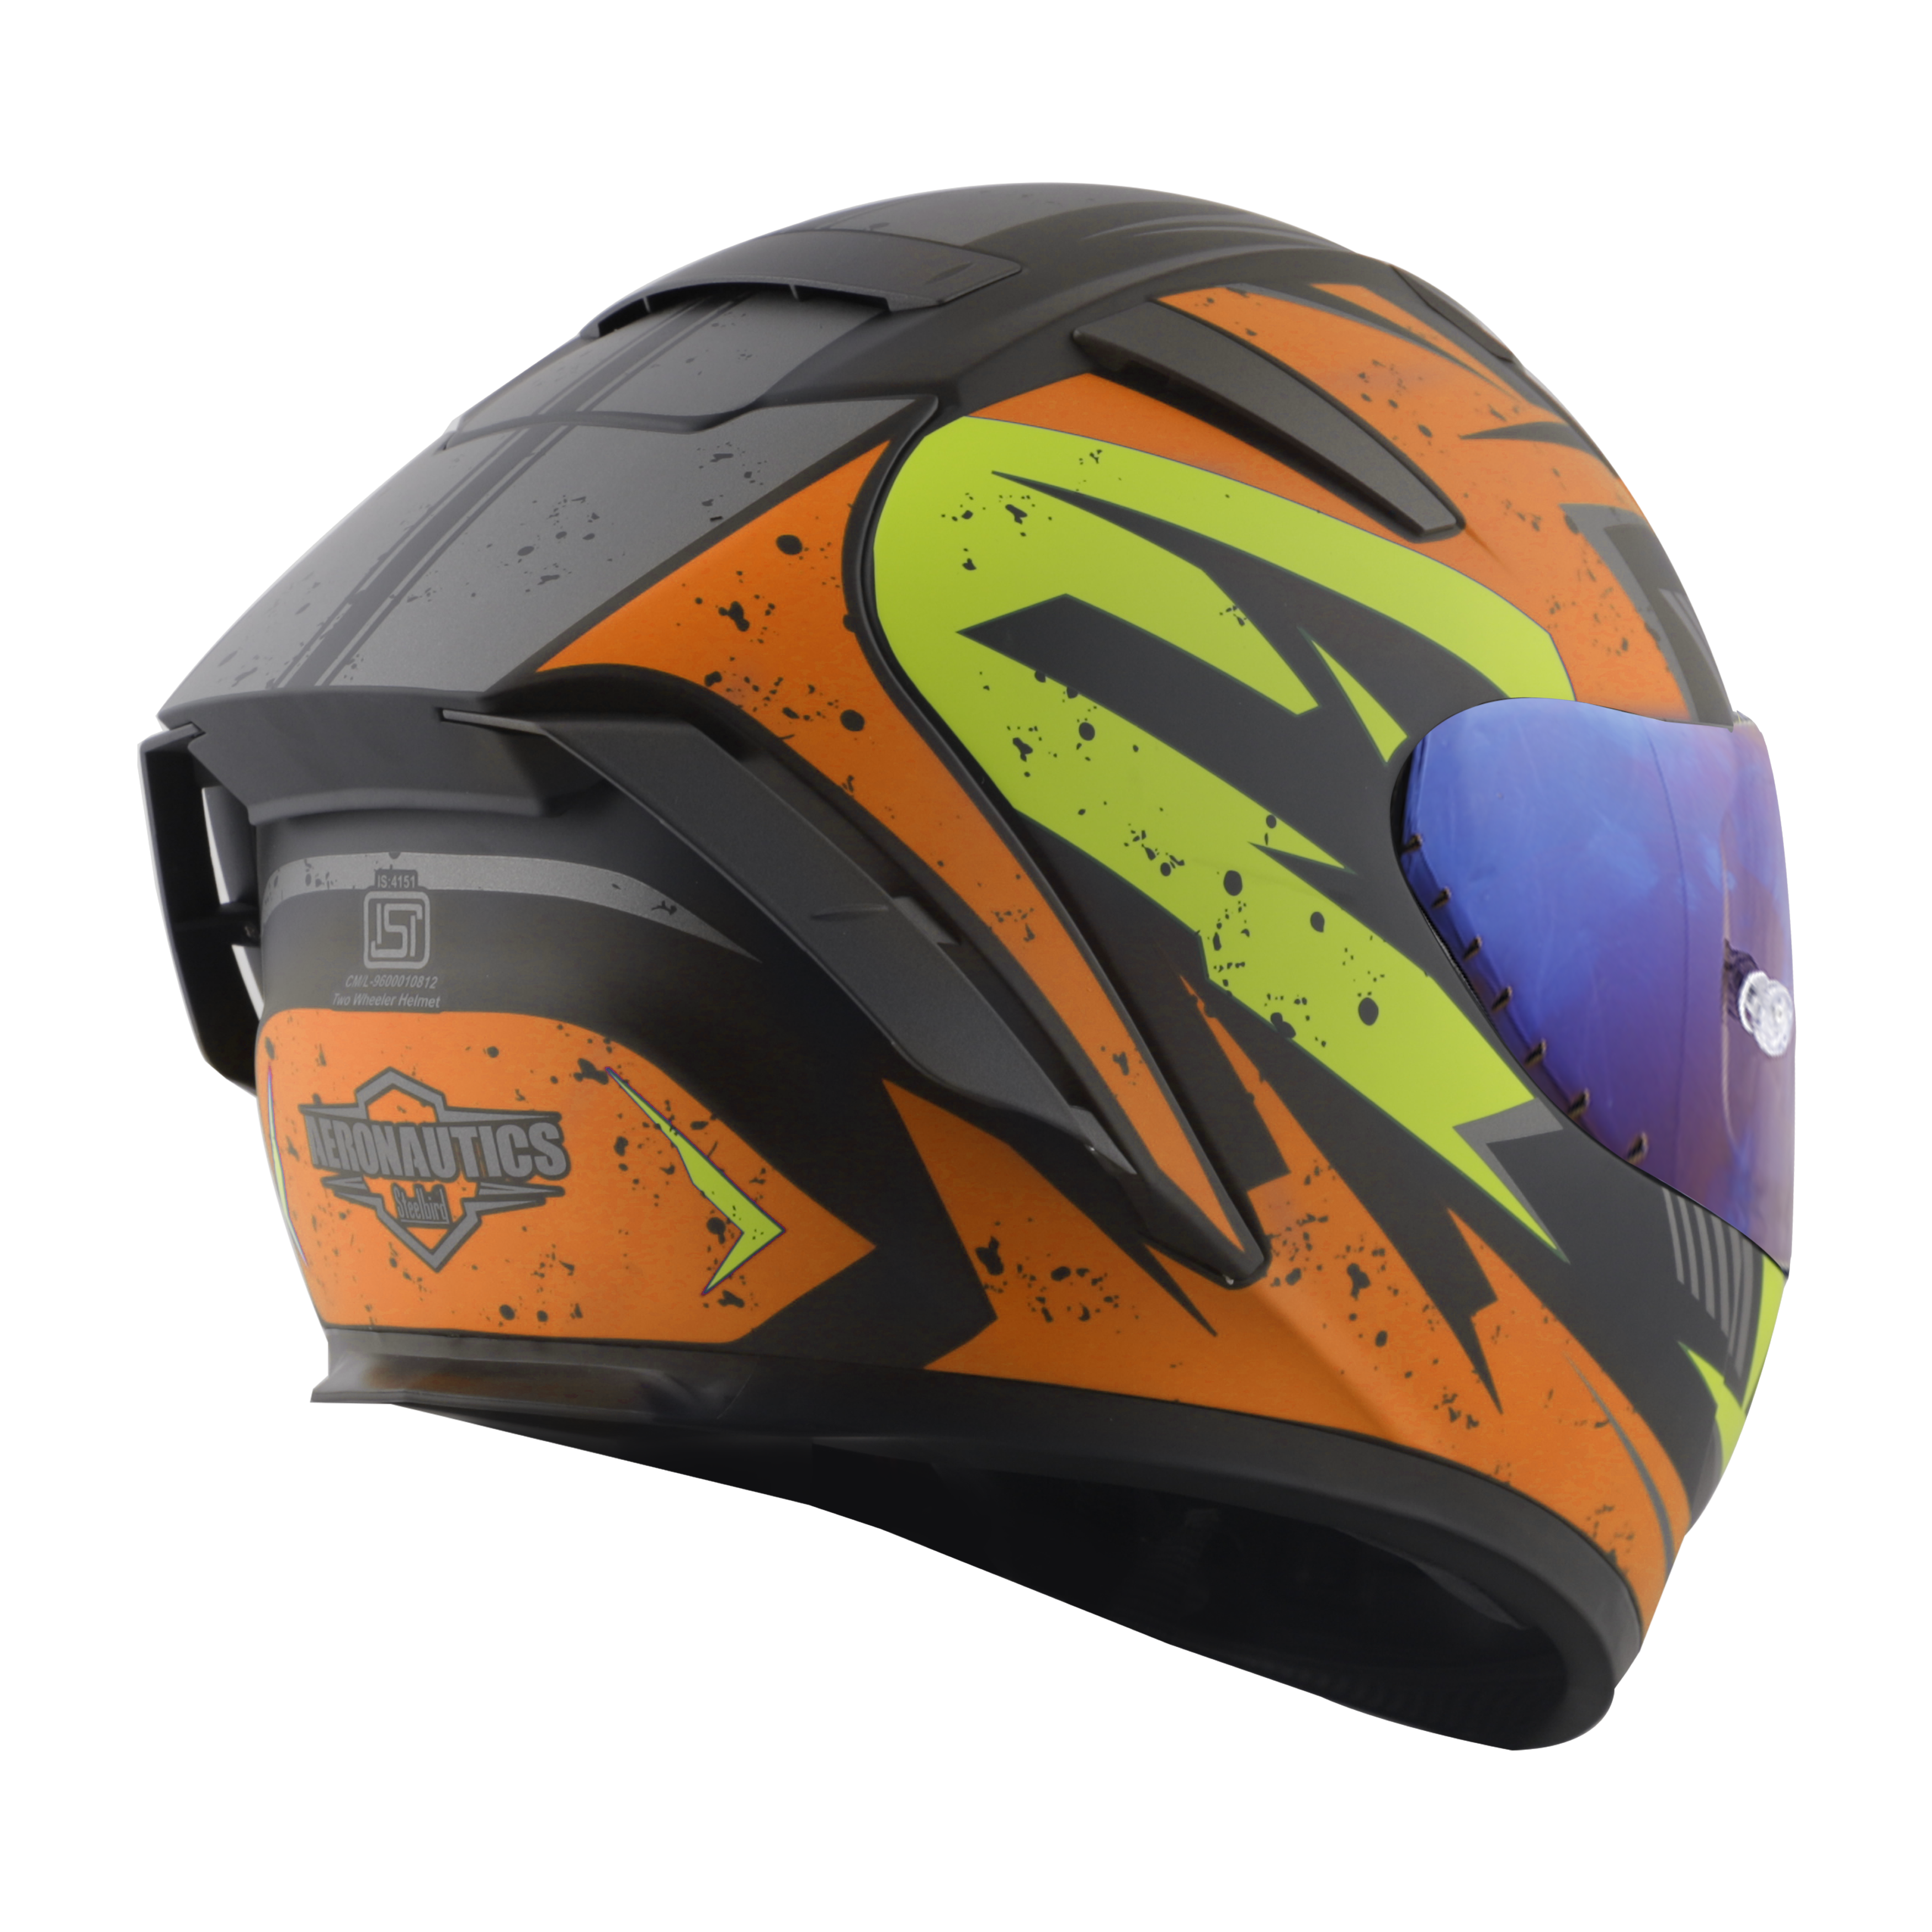 SA-2 BREEZER GLOSSY BLACK WITH ORANGE FITTED WITH CLEAR VISOR EXTRA CHROME RAINBOW VISOR FREE (WITH ANTI-FOG SHIELD HOLDER)